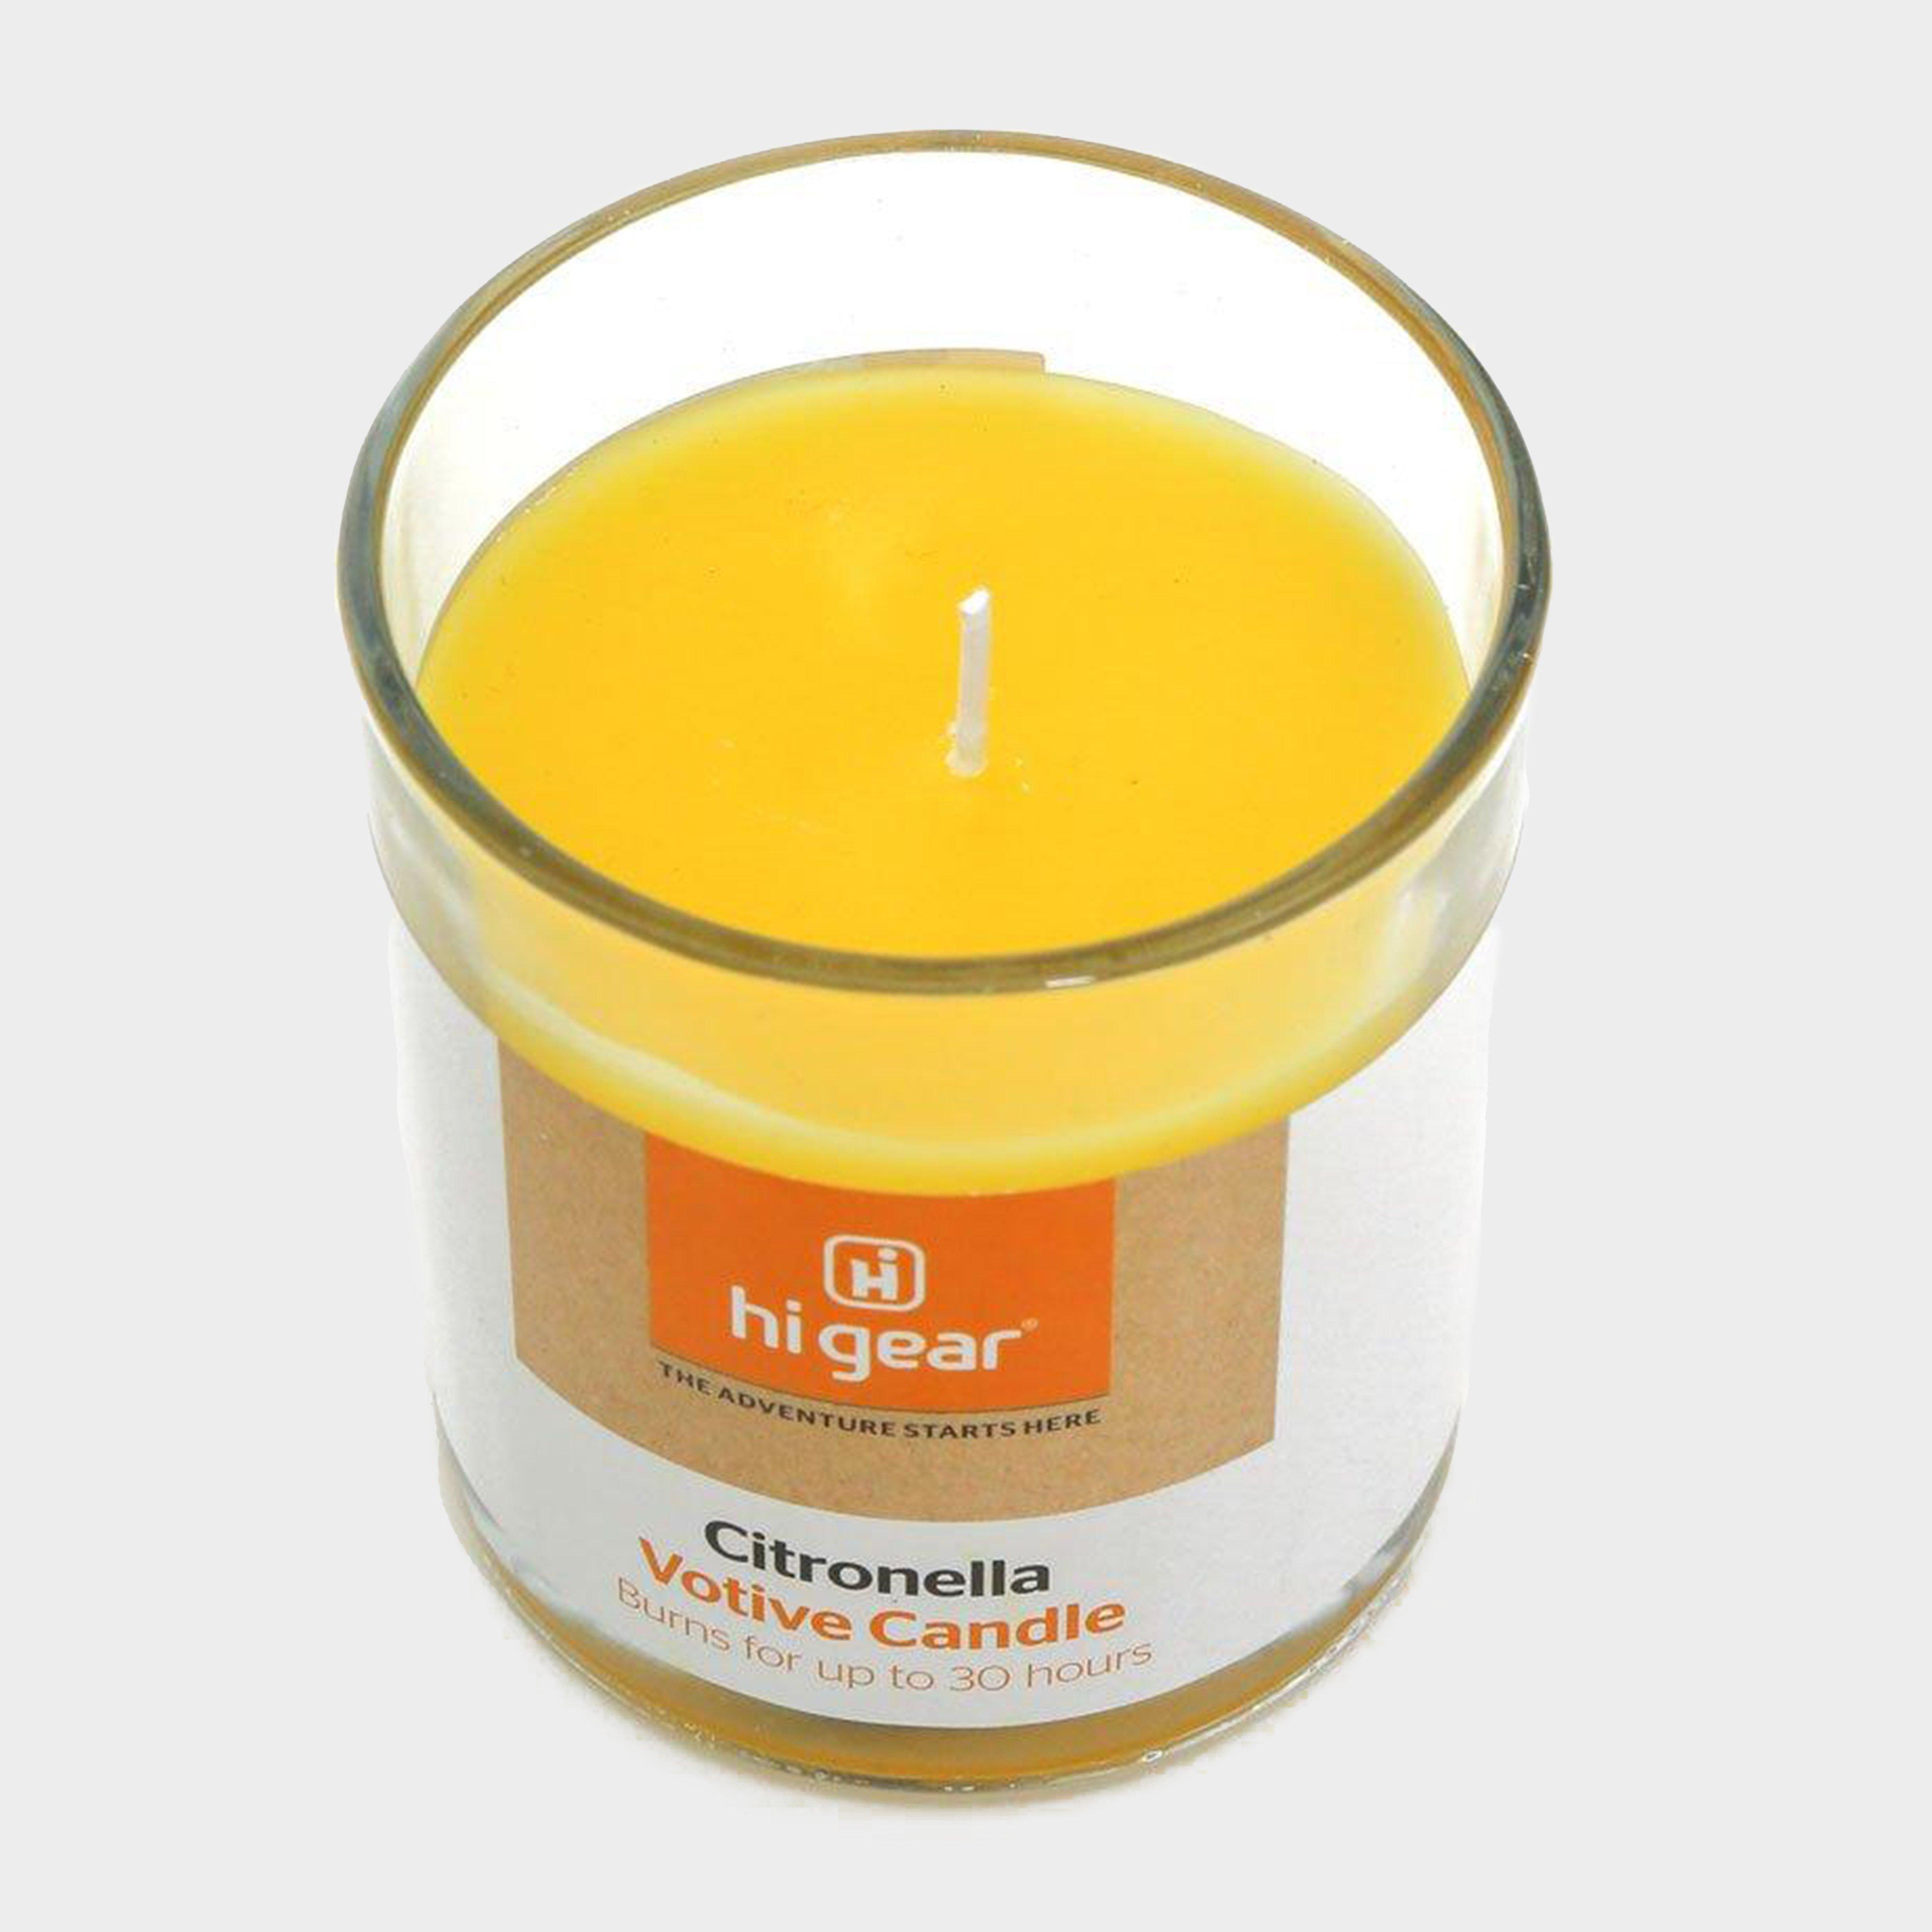 Hi-gear Citronella Votive Candle - Yellow/candle  Yellow/candle